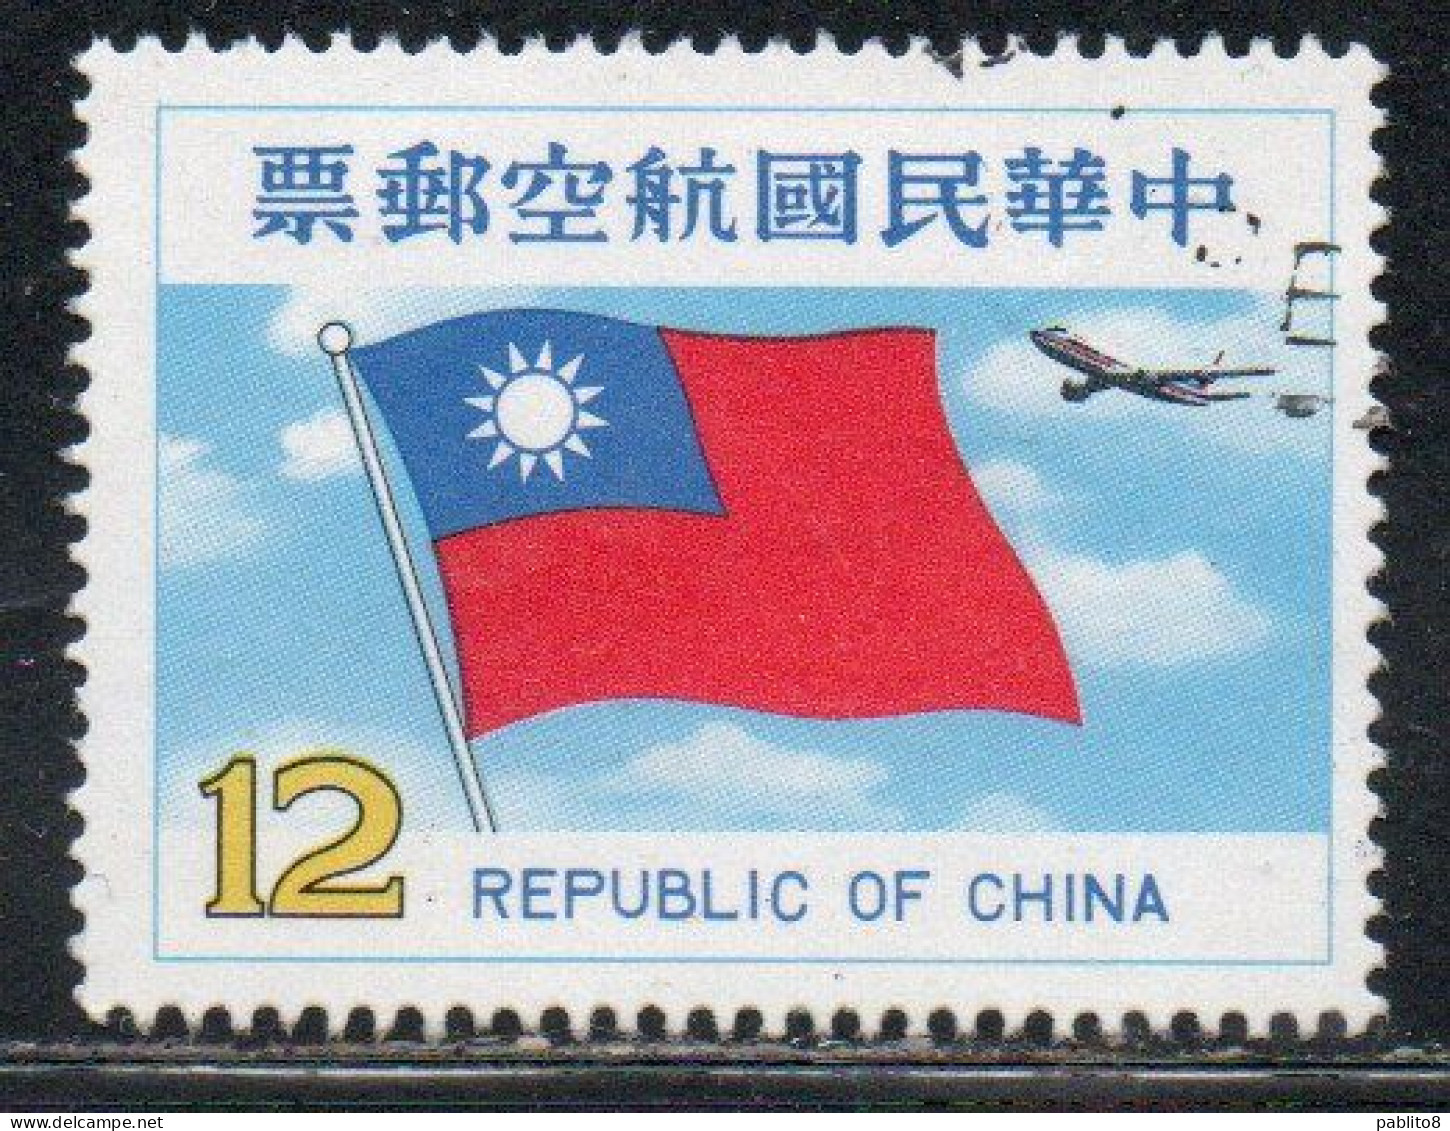 CHINA REPUBLIC CINA TAIWAN FORMOSA 1980 AIR POST MAIL AIRMAIL NATIONAL FLAG JET 12$ USED USATO OBLITERE' - Luchtpost